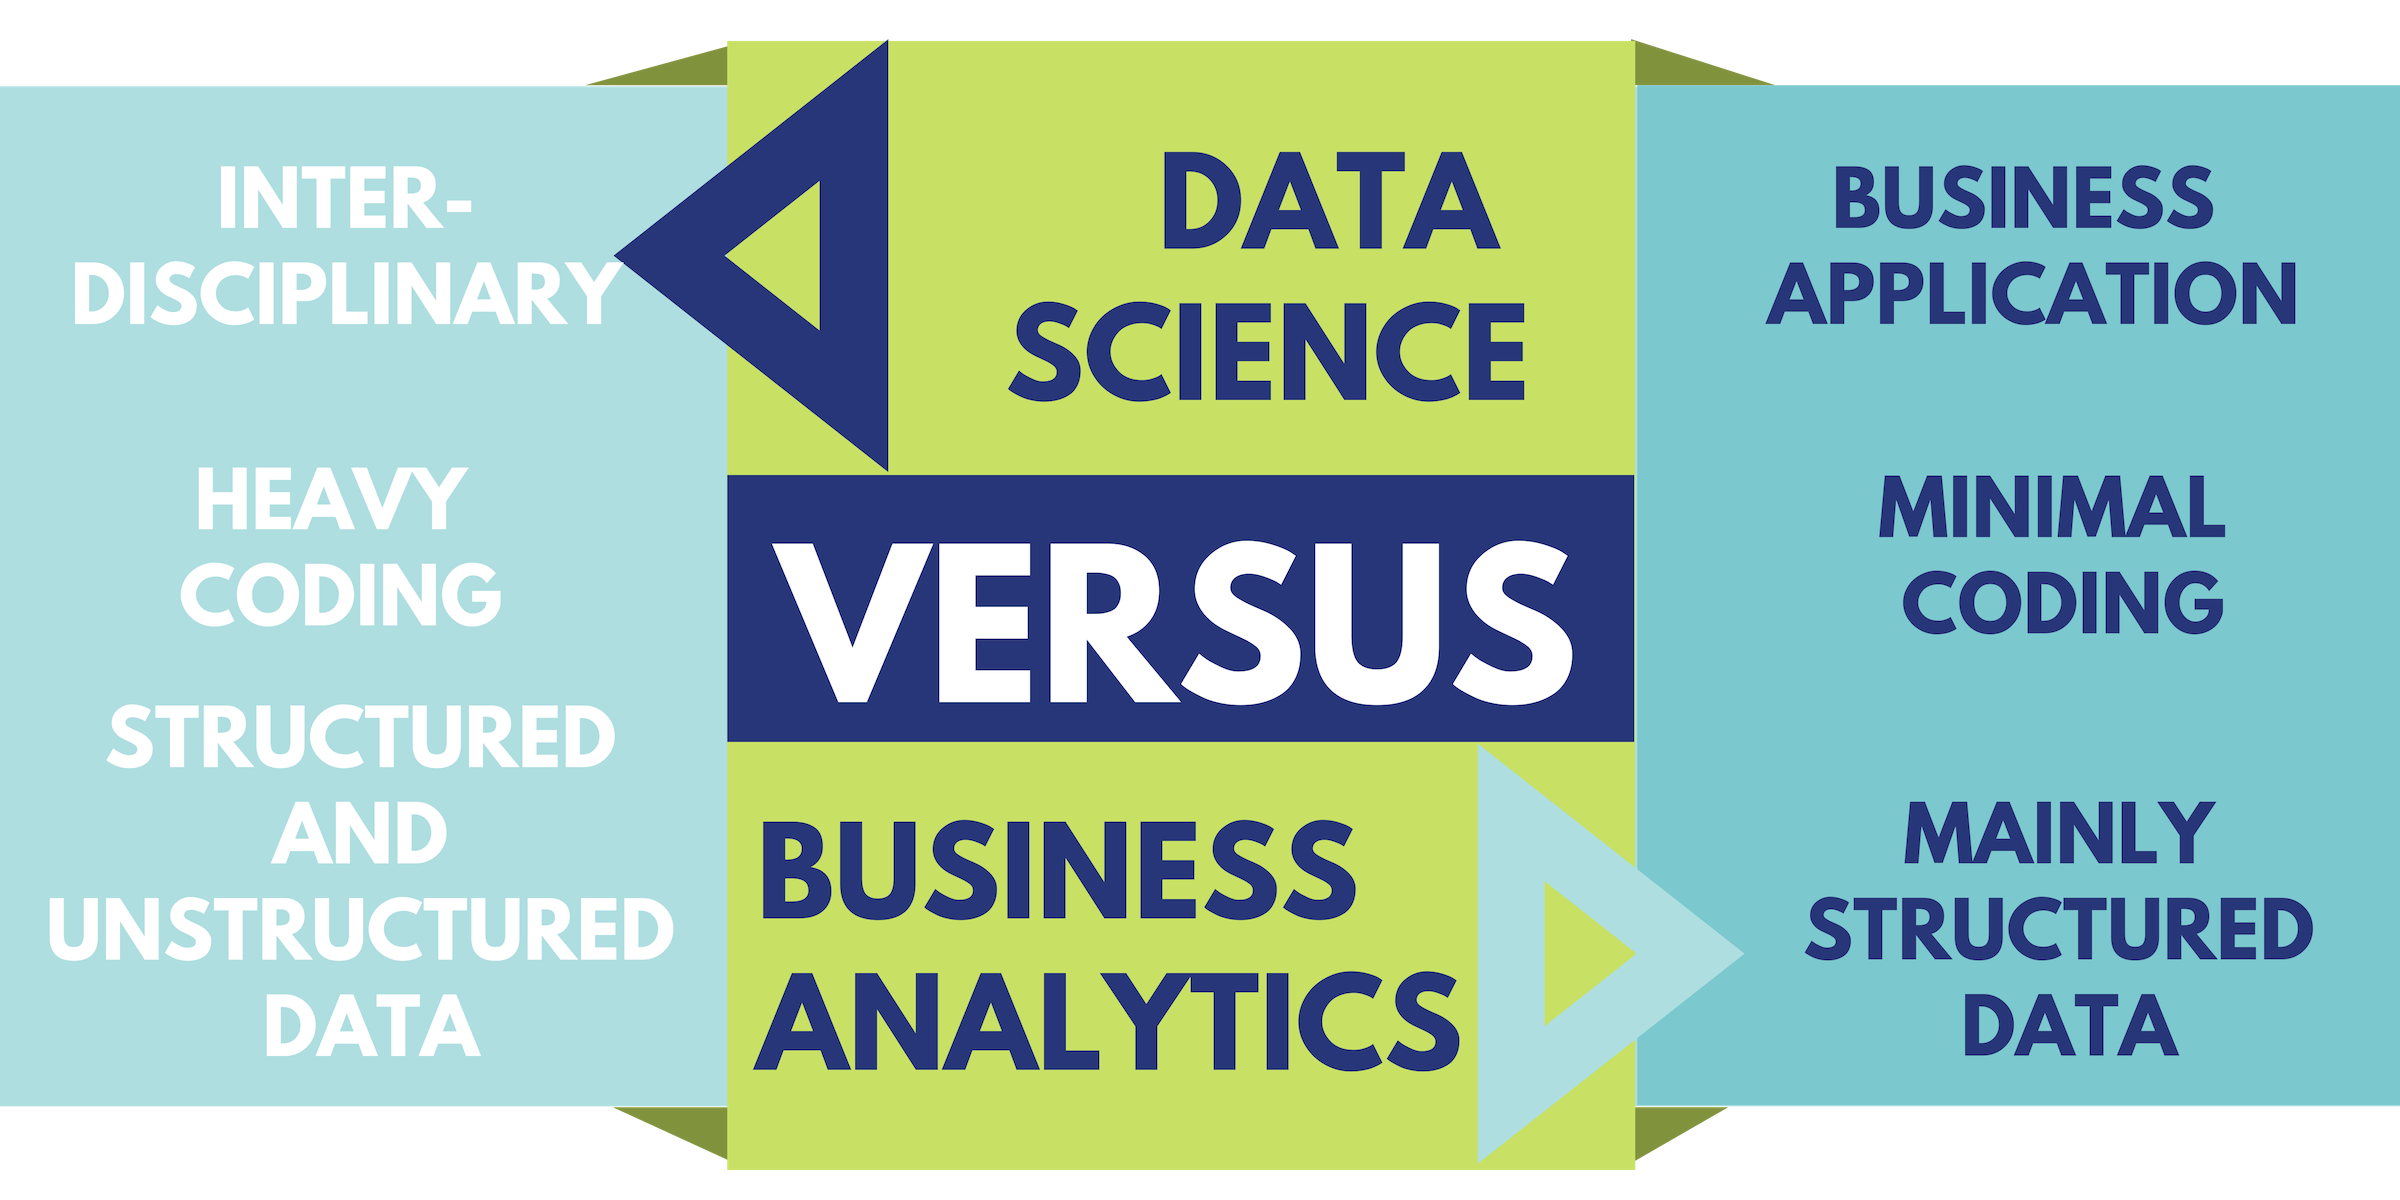 Data science: inter-disciplinary, heavy coding, structured and unstructured data VERSUS Business Analytics: Business application, minimal coding, mainly structured data